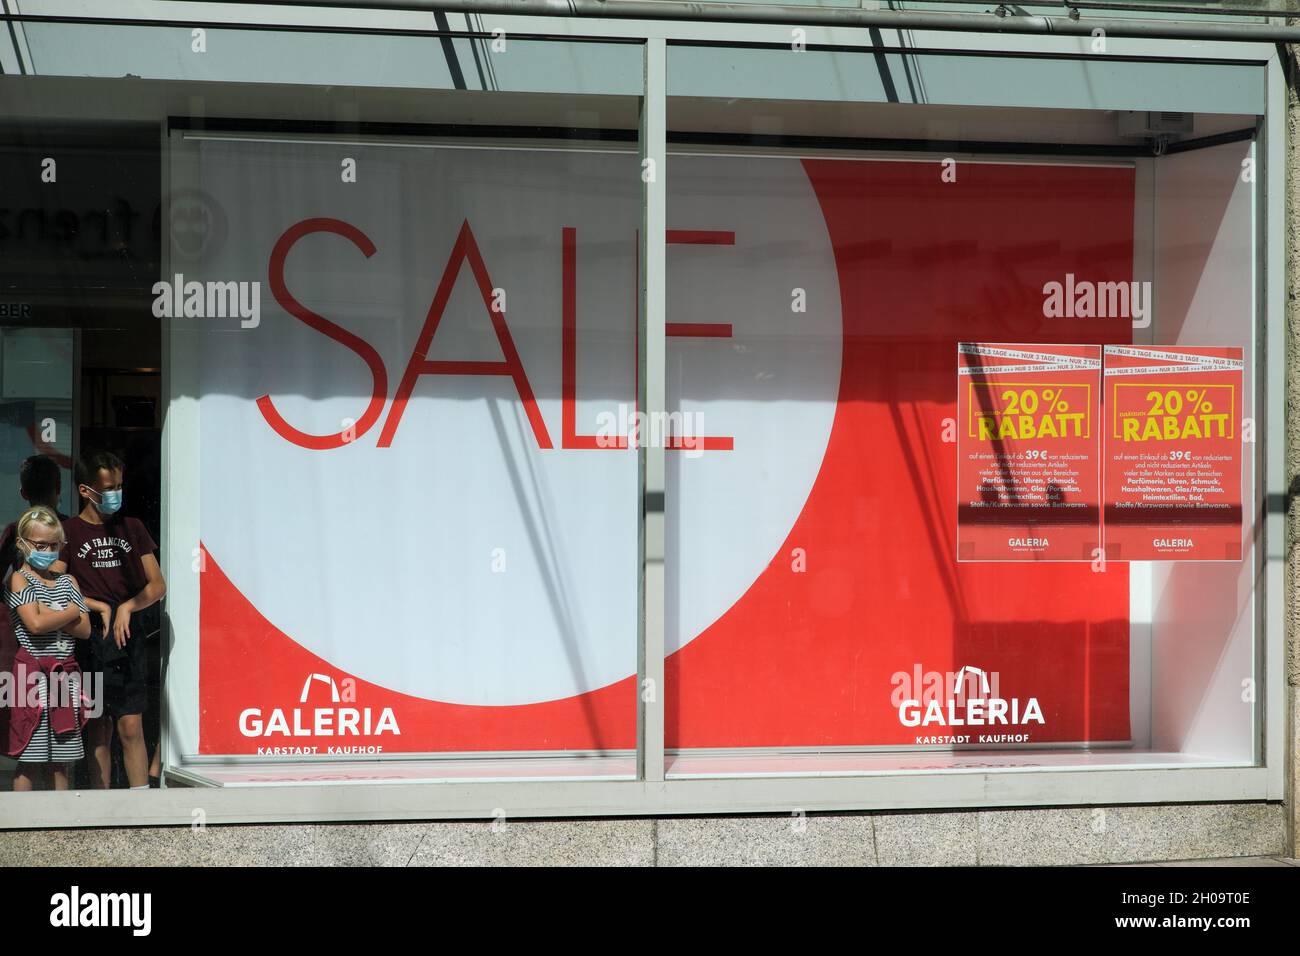 Galeria Karstadt Kaufhof High Resolution Stock Photography and Images -  Alamy